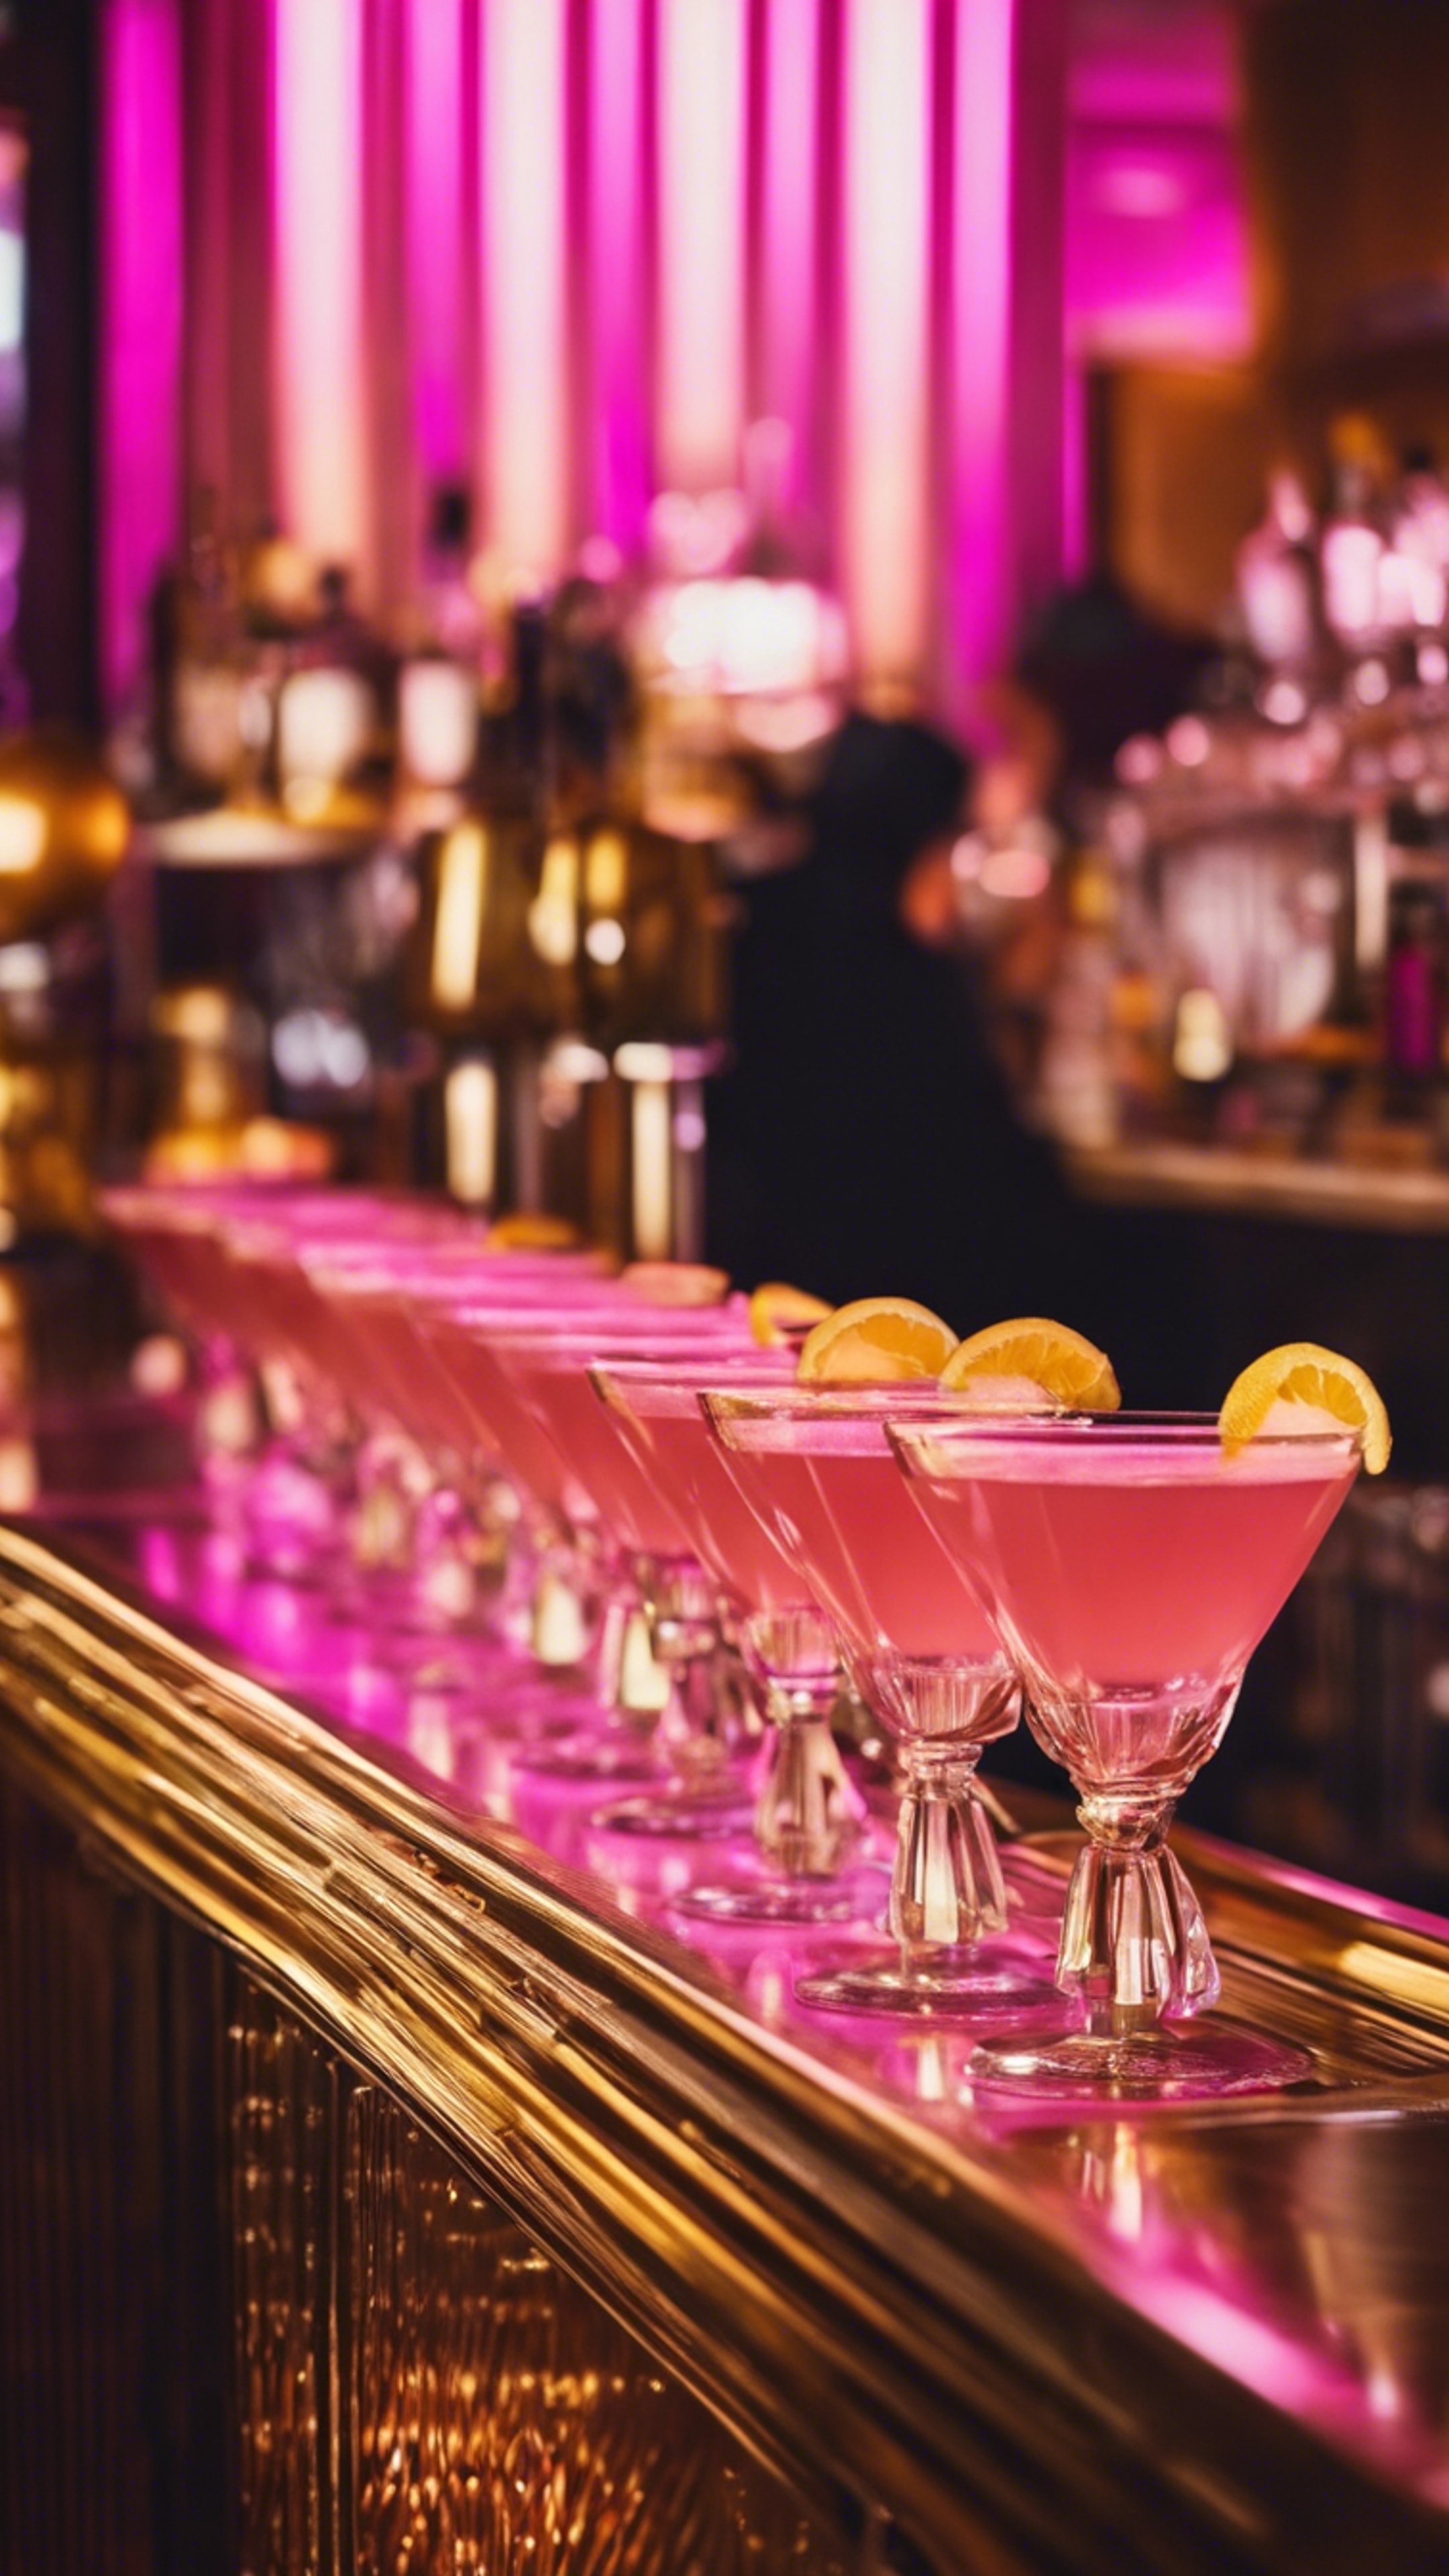 An art deco style pink and gold cocktail bar, bustling with glamour and elegance. Tapeta[0d4a66f95ef04aa3ad16]